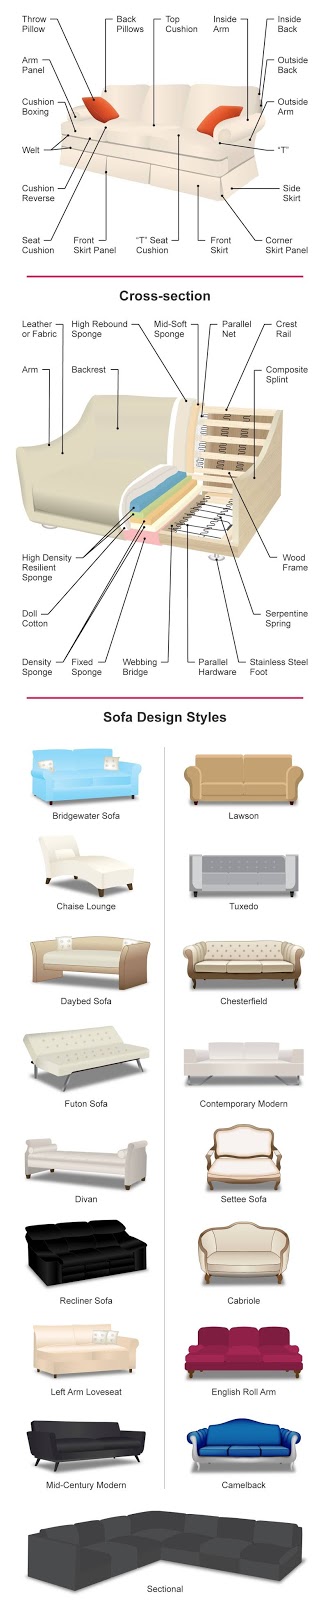 Couches And Sofas Styles Explained, Parts Of A Sofa Diagram